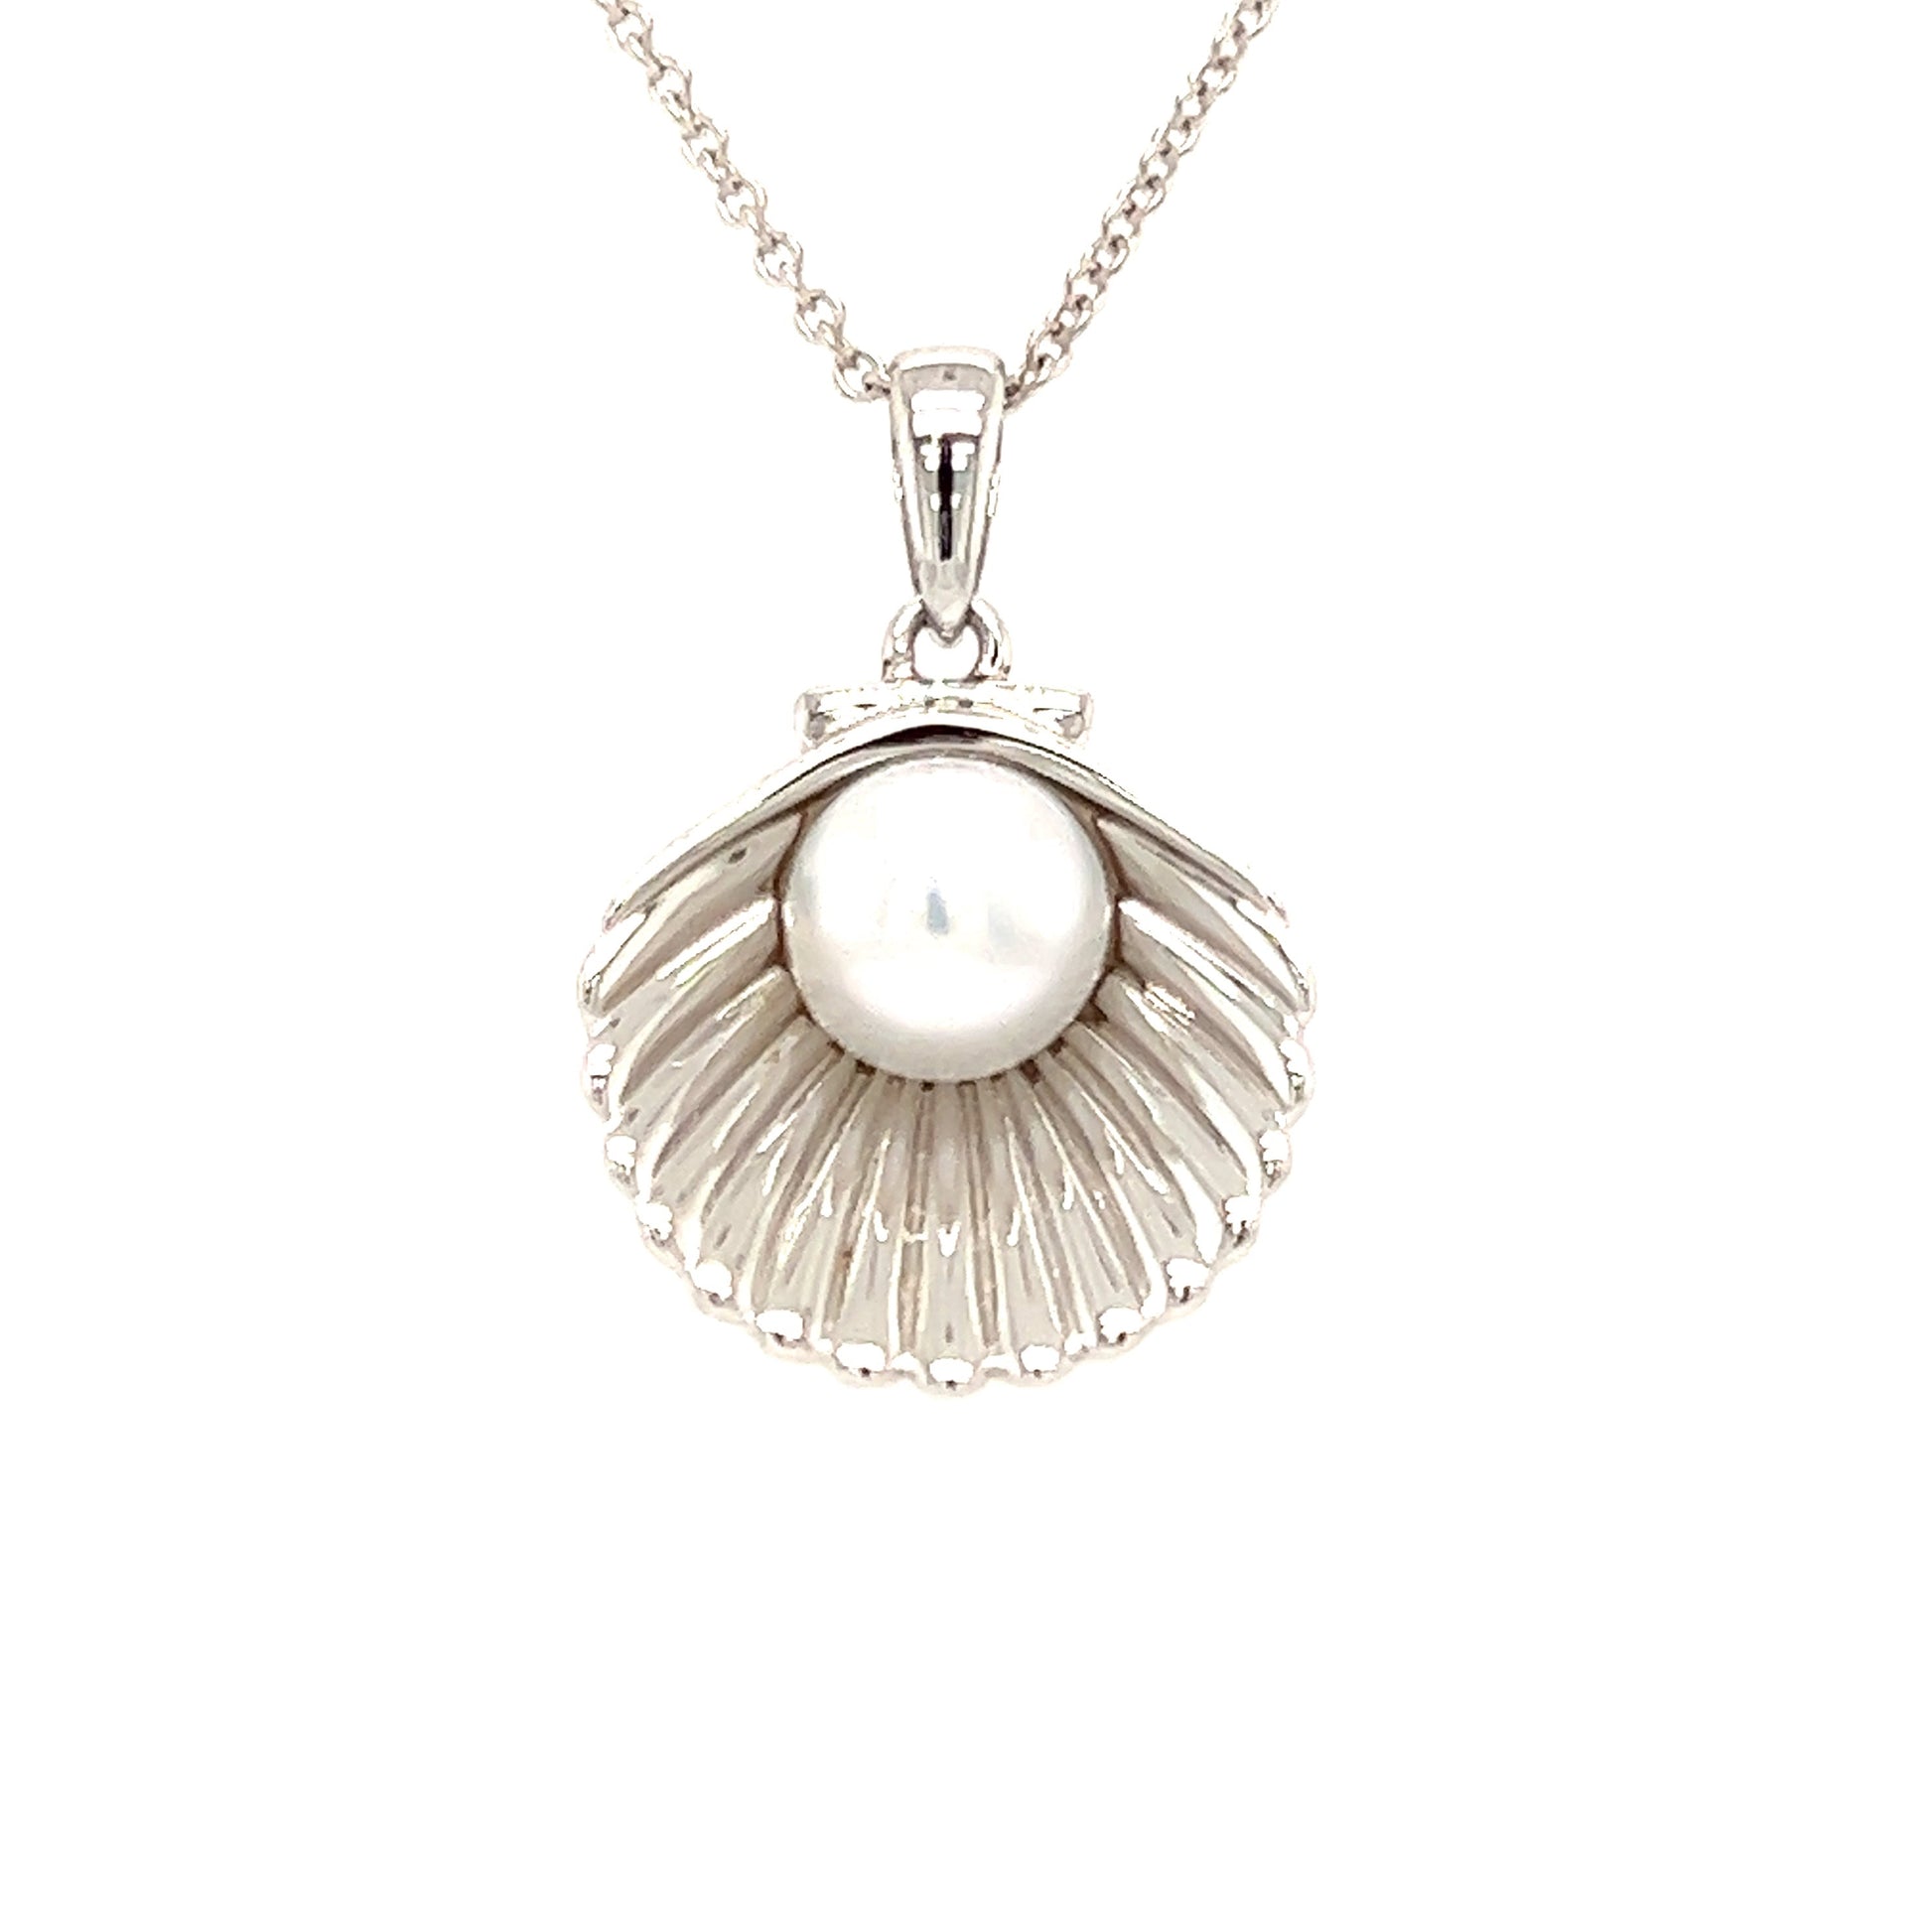 Shell Necklace with White Pearl in Sterling Silver Front View